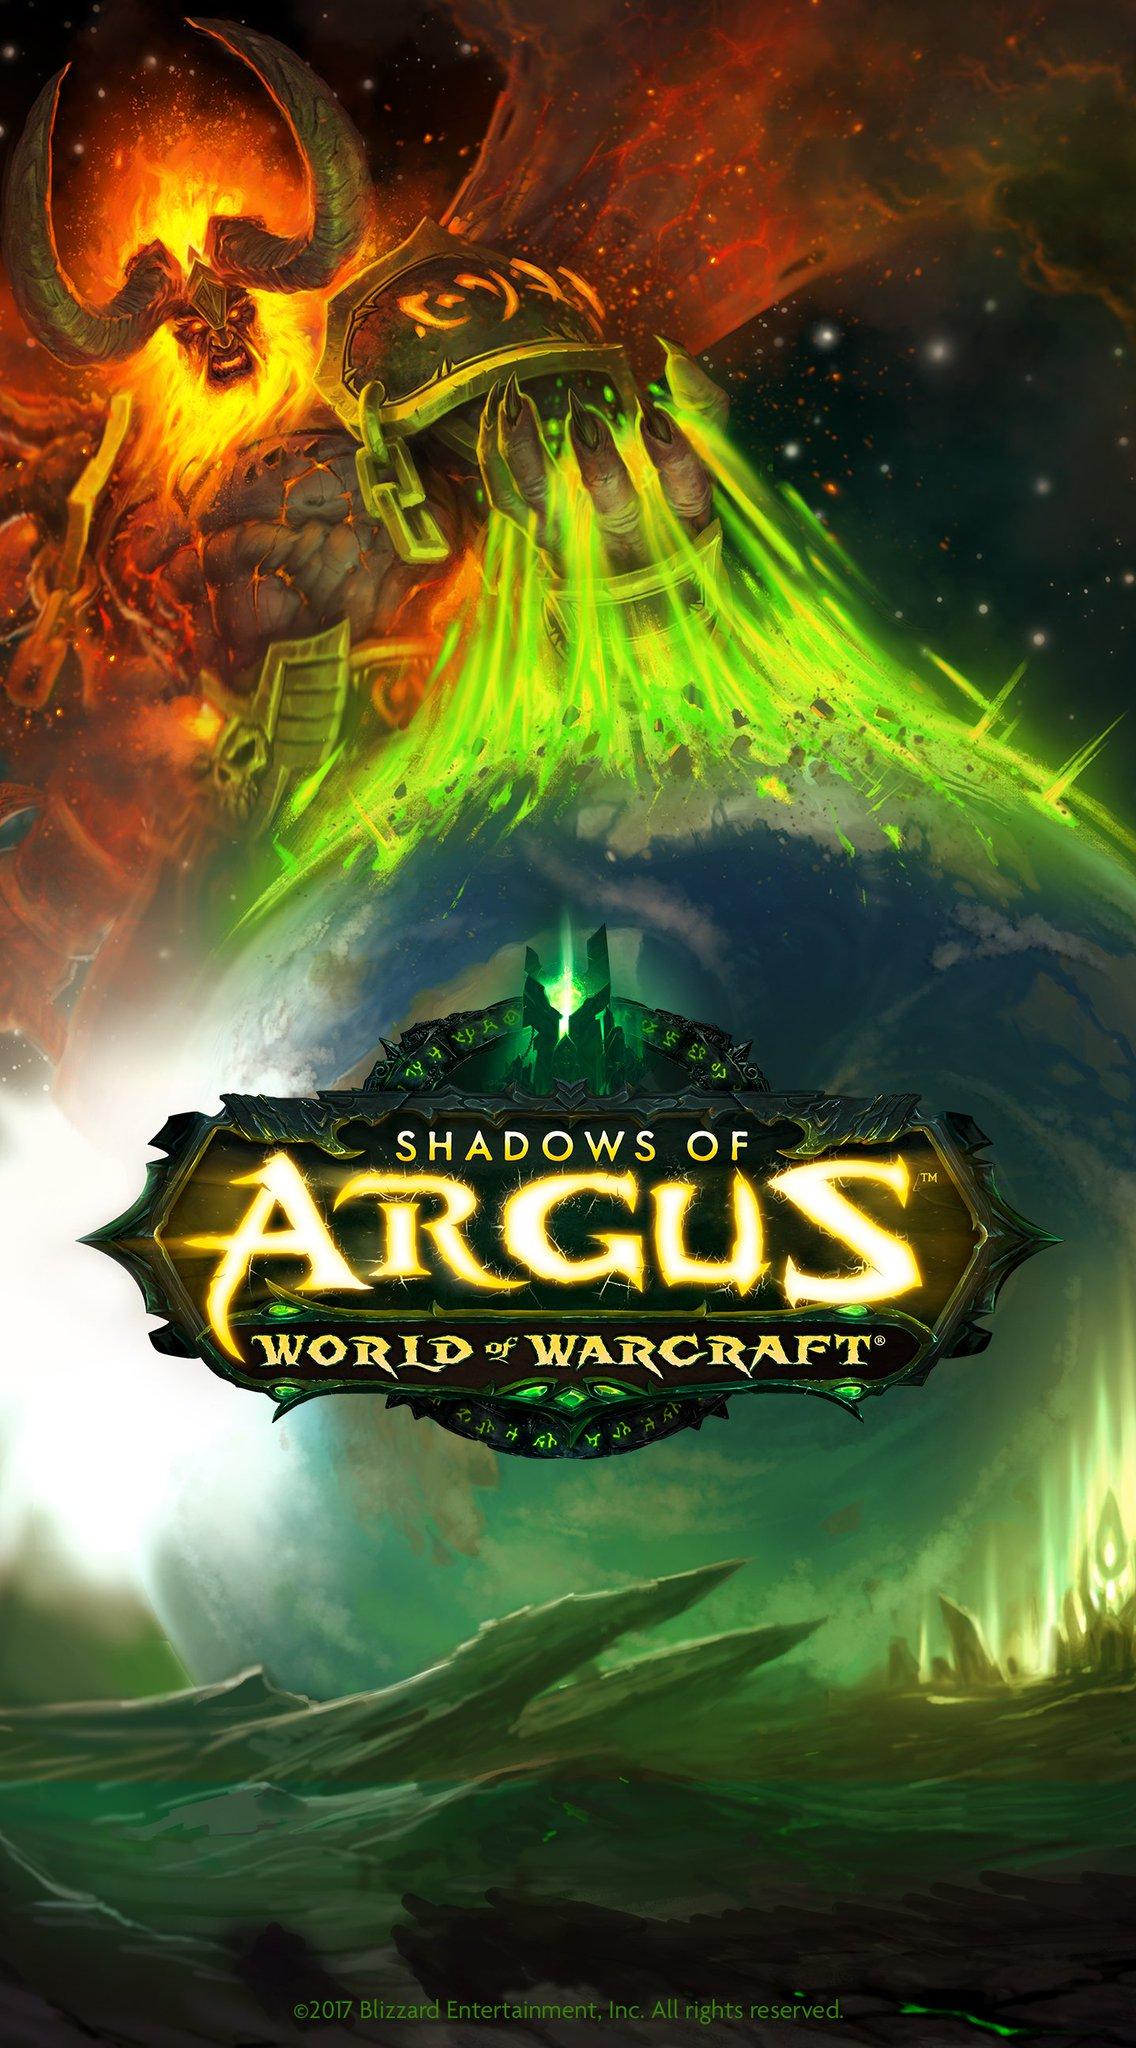 World of Warcraft for Argus with these epic